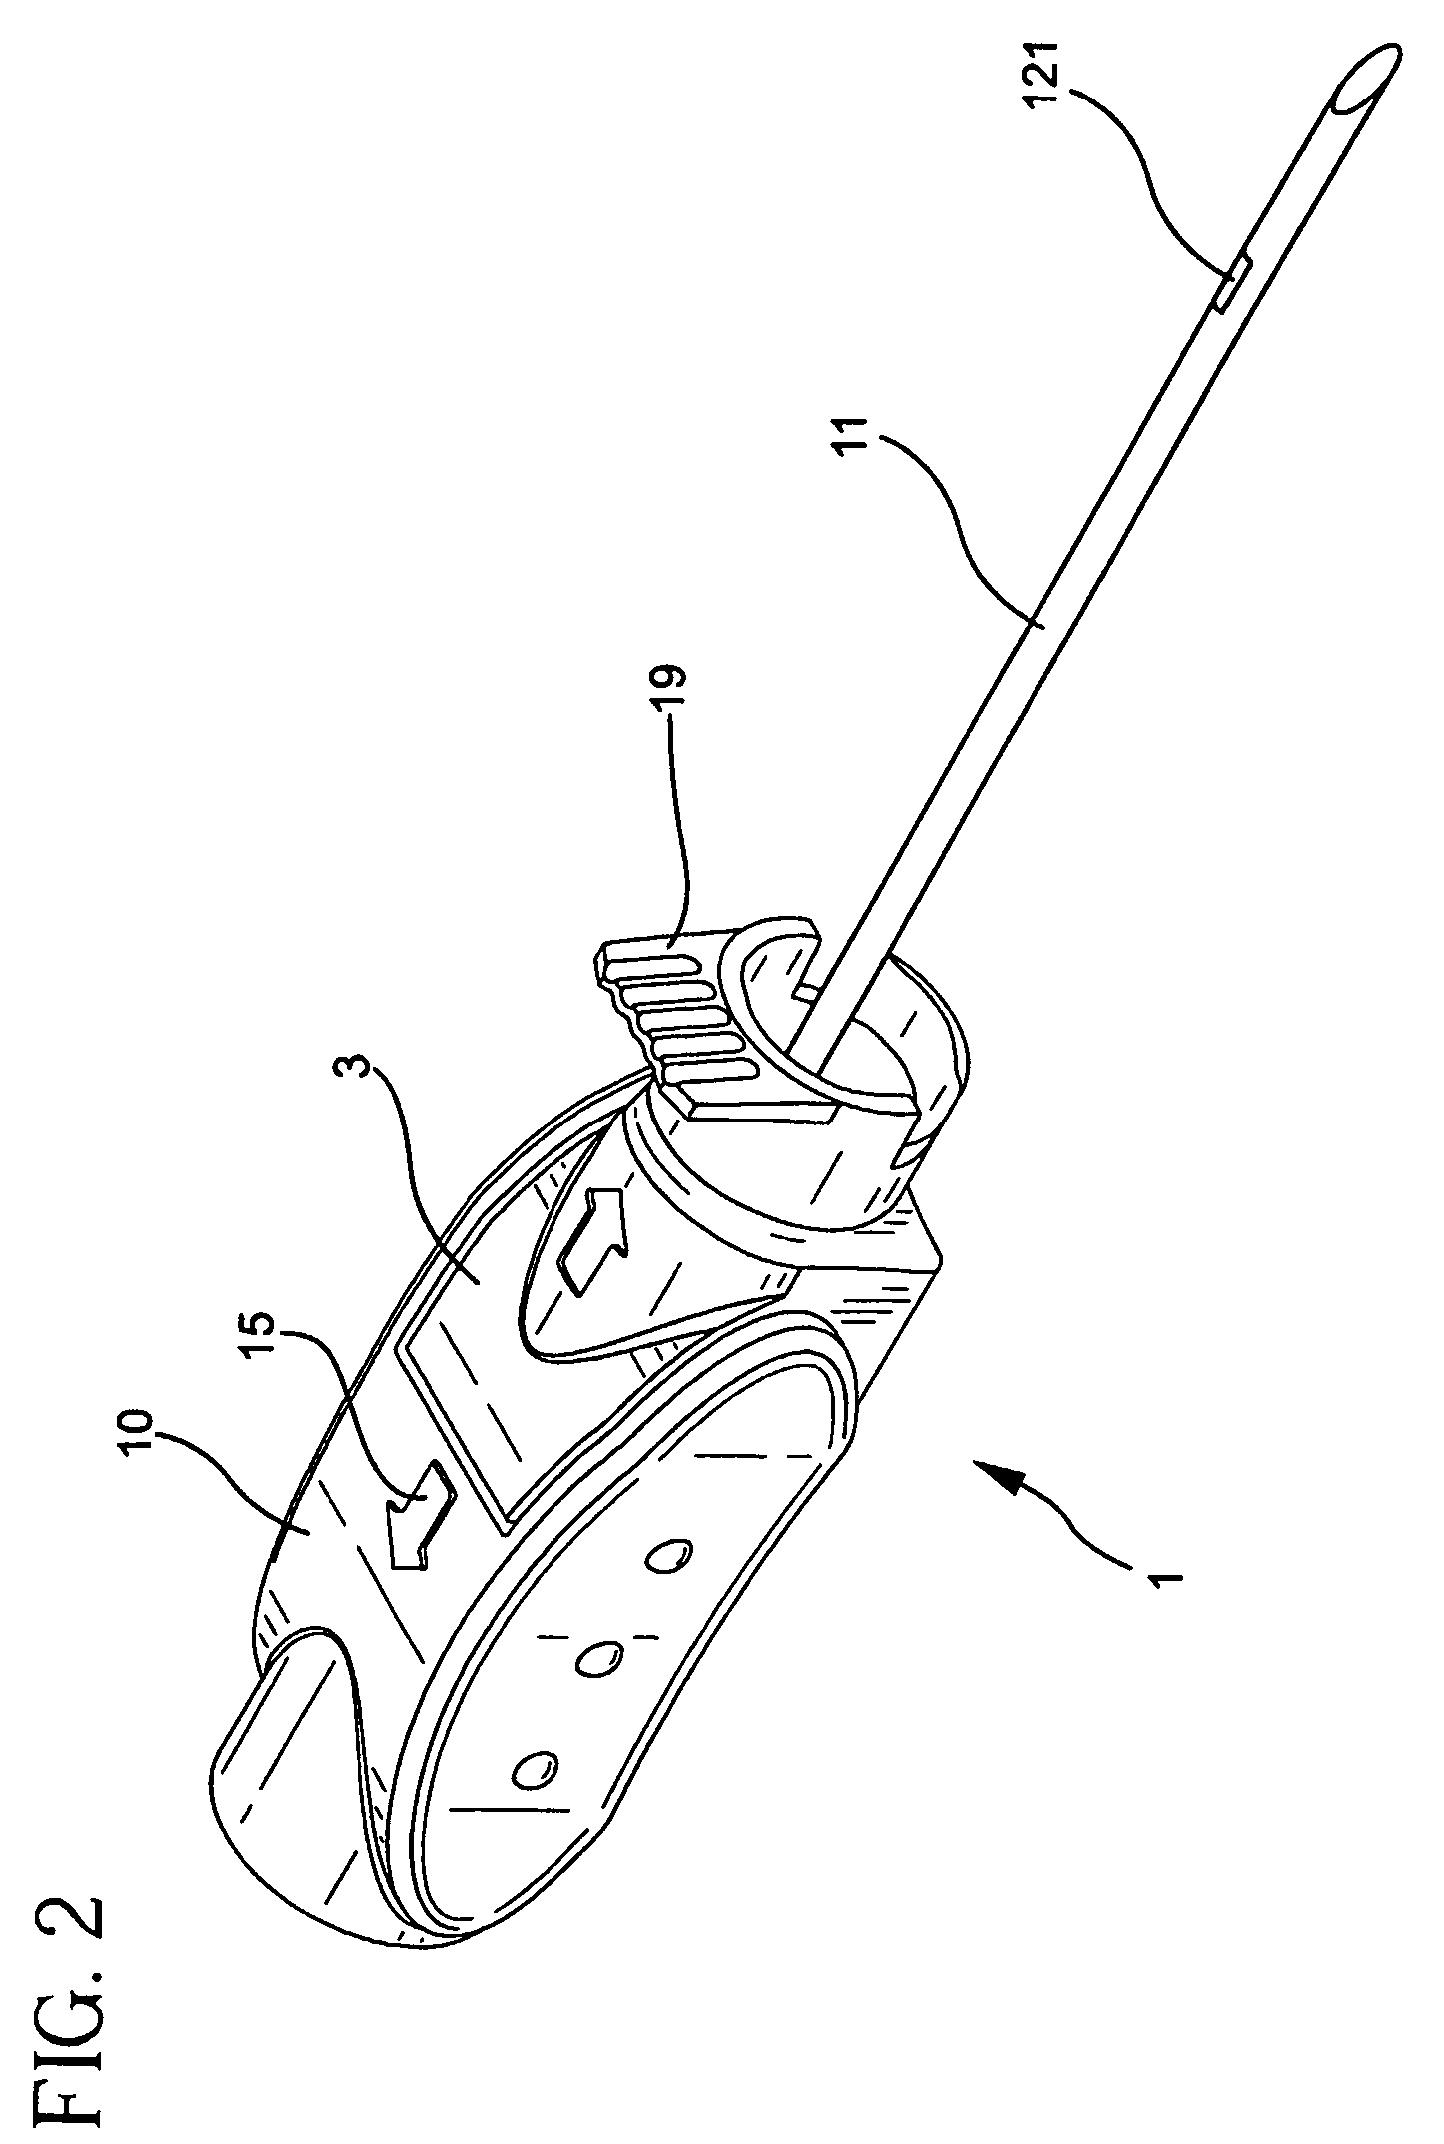 Method of forming IV catheter and needle assembly